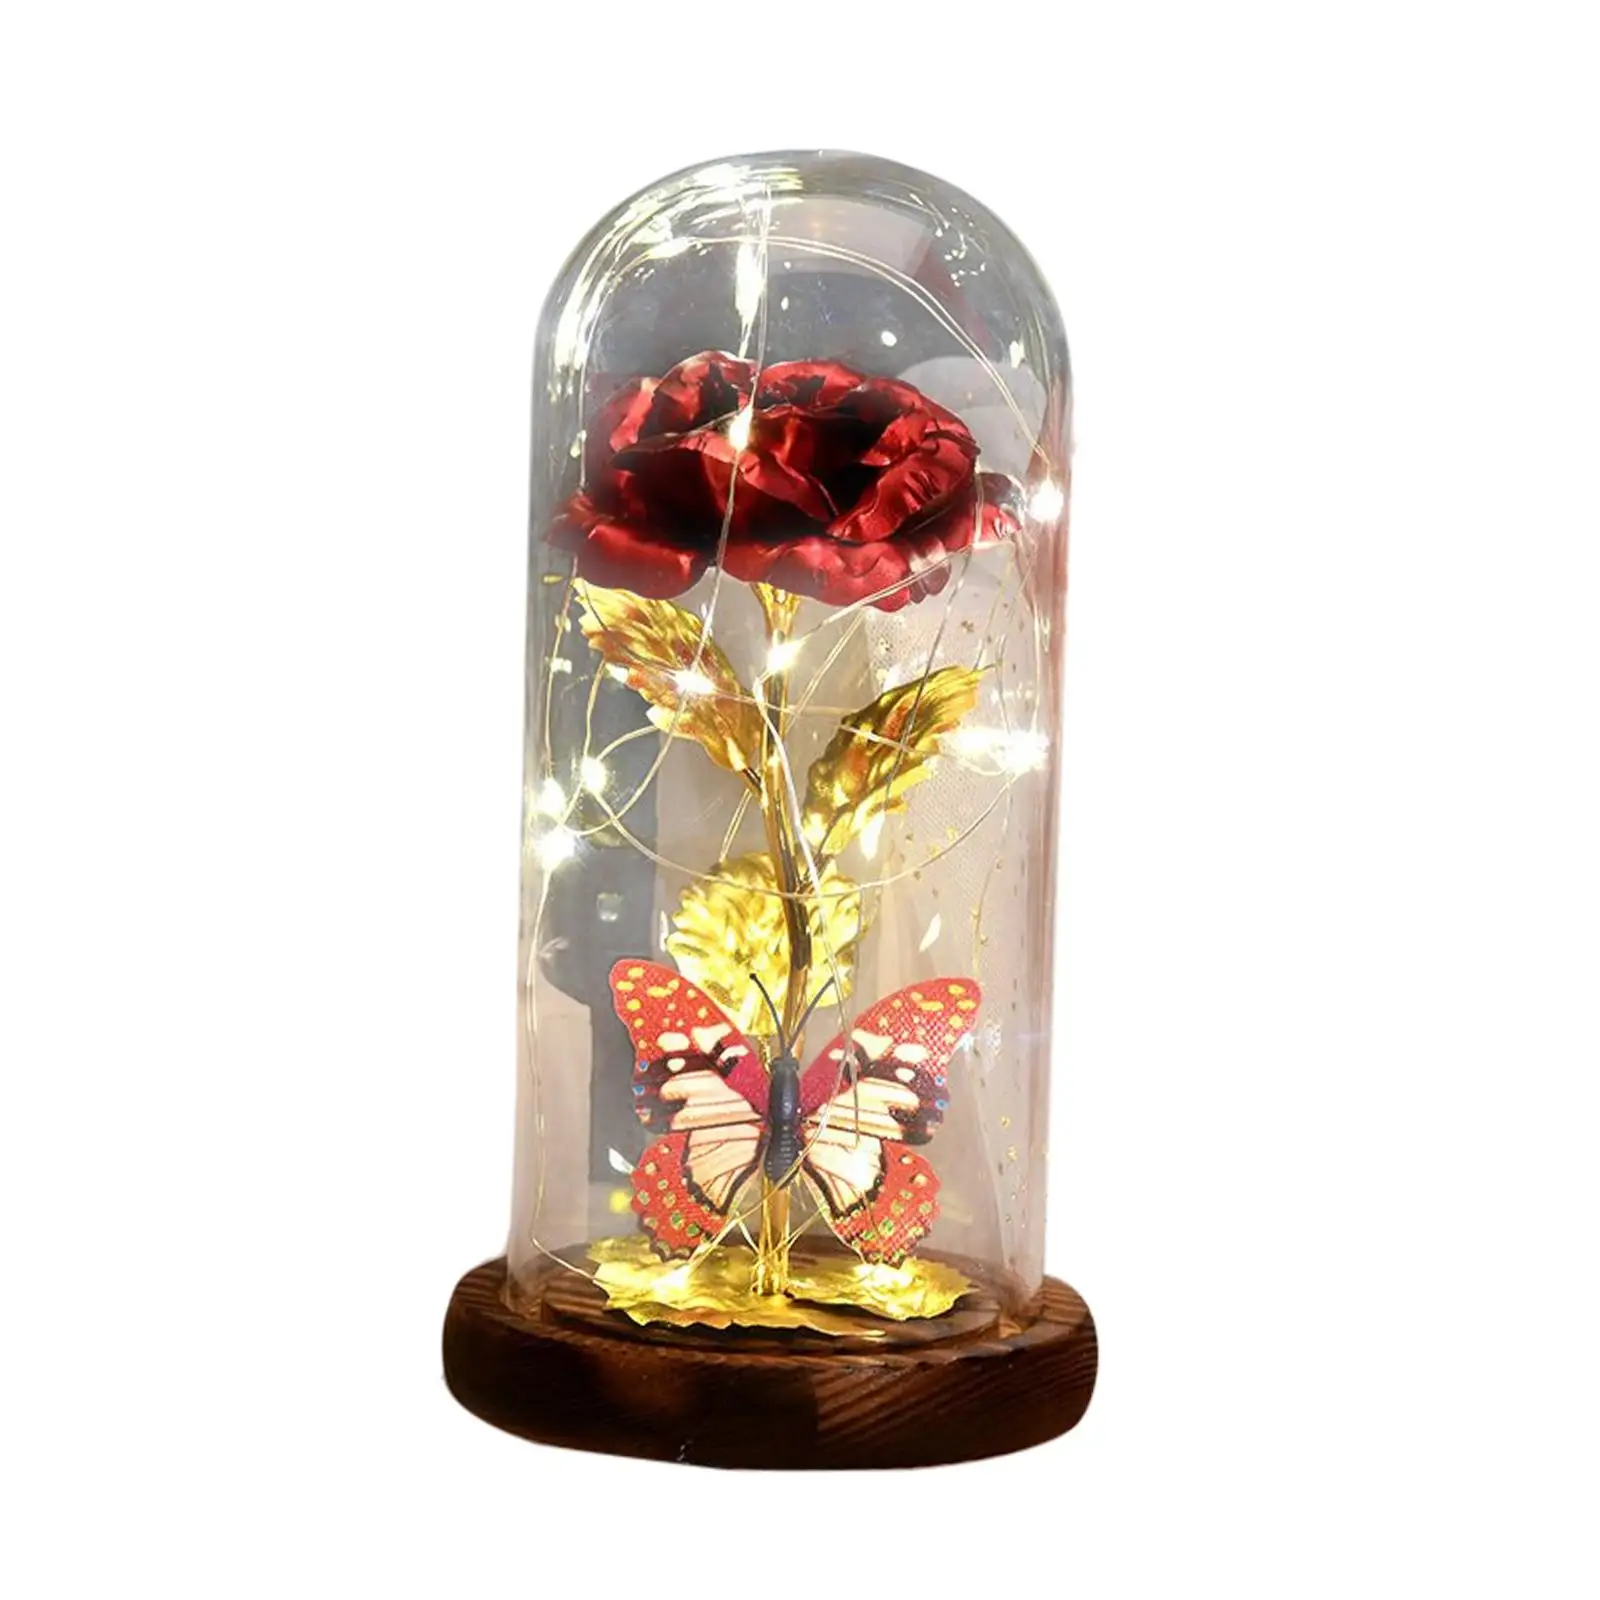 Rose Flower Ornaments Decorative Glass Cover Crafts LED Night Light for Birthday Desktop Gift Dining Room Home Decorations